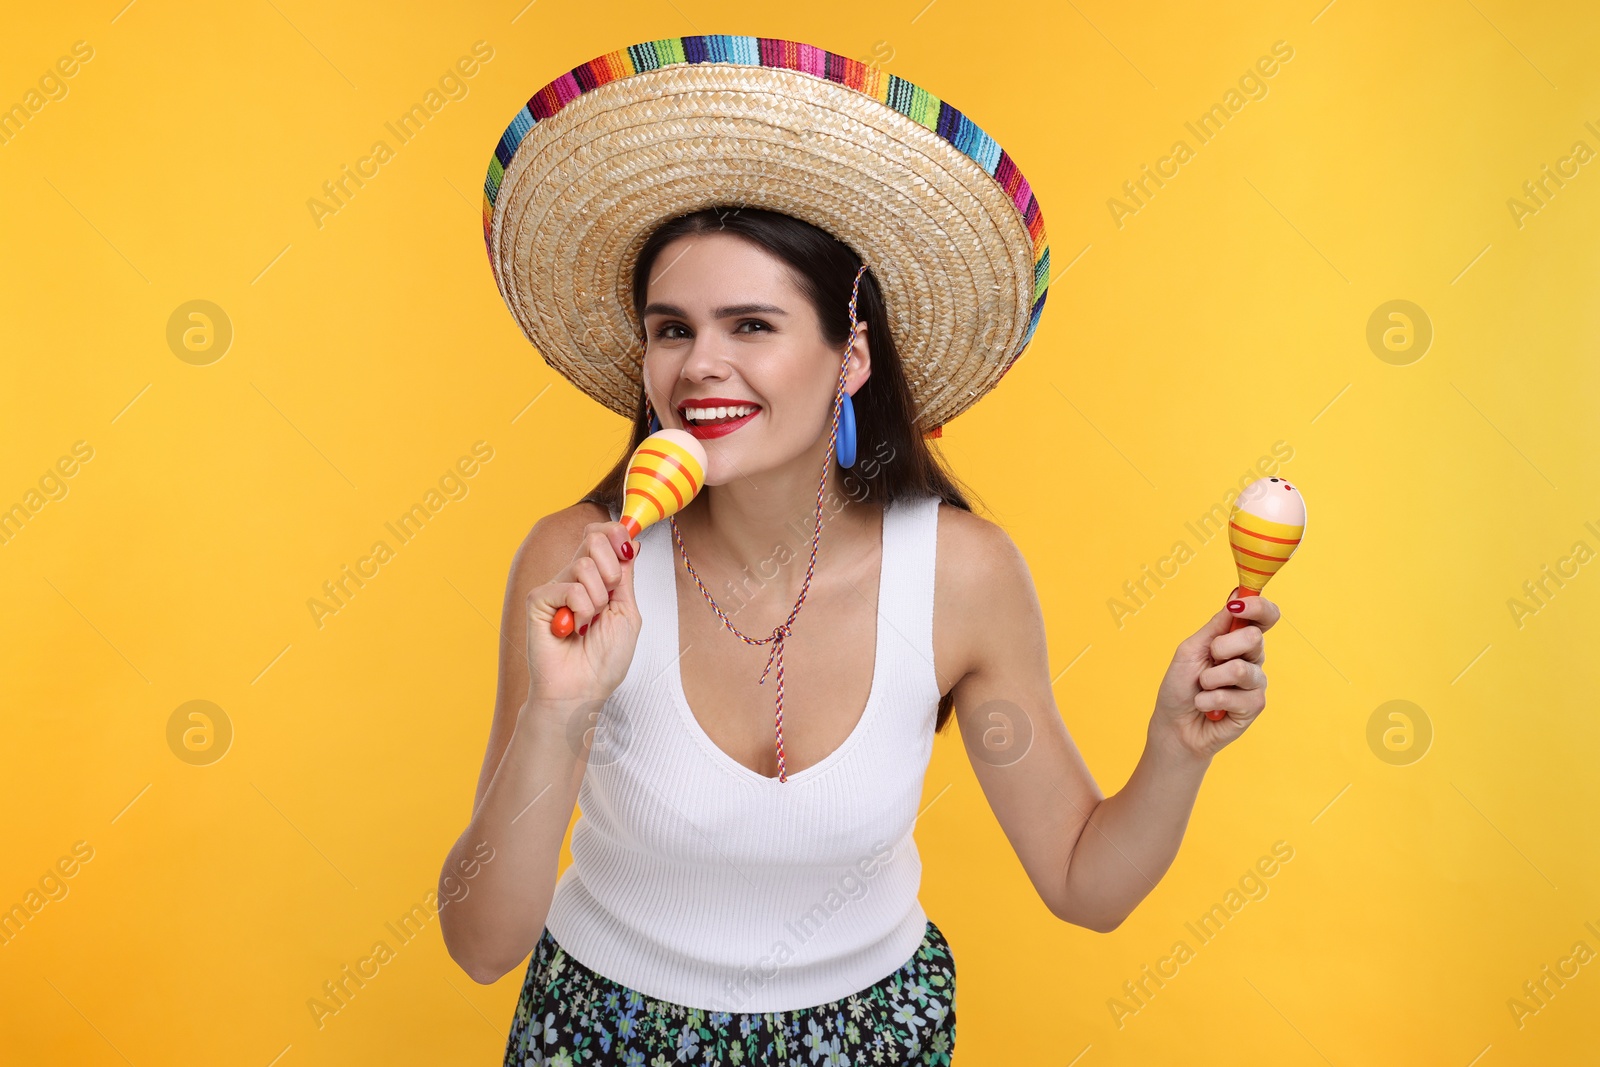 Photo of Young woman in Mexican sombrero hat with maracas on yellow background